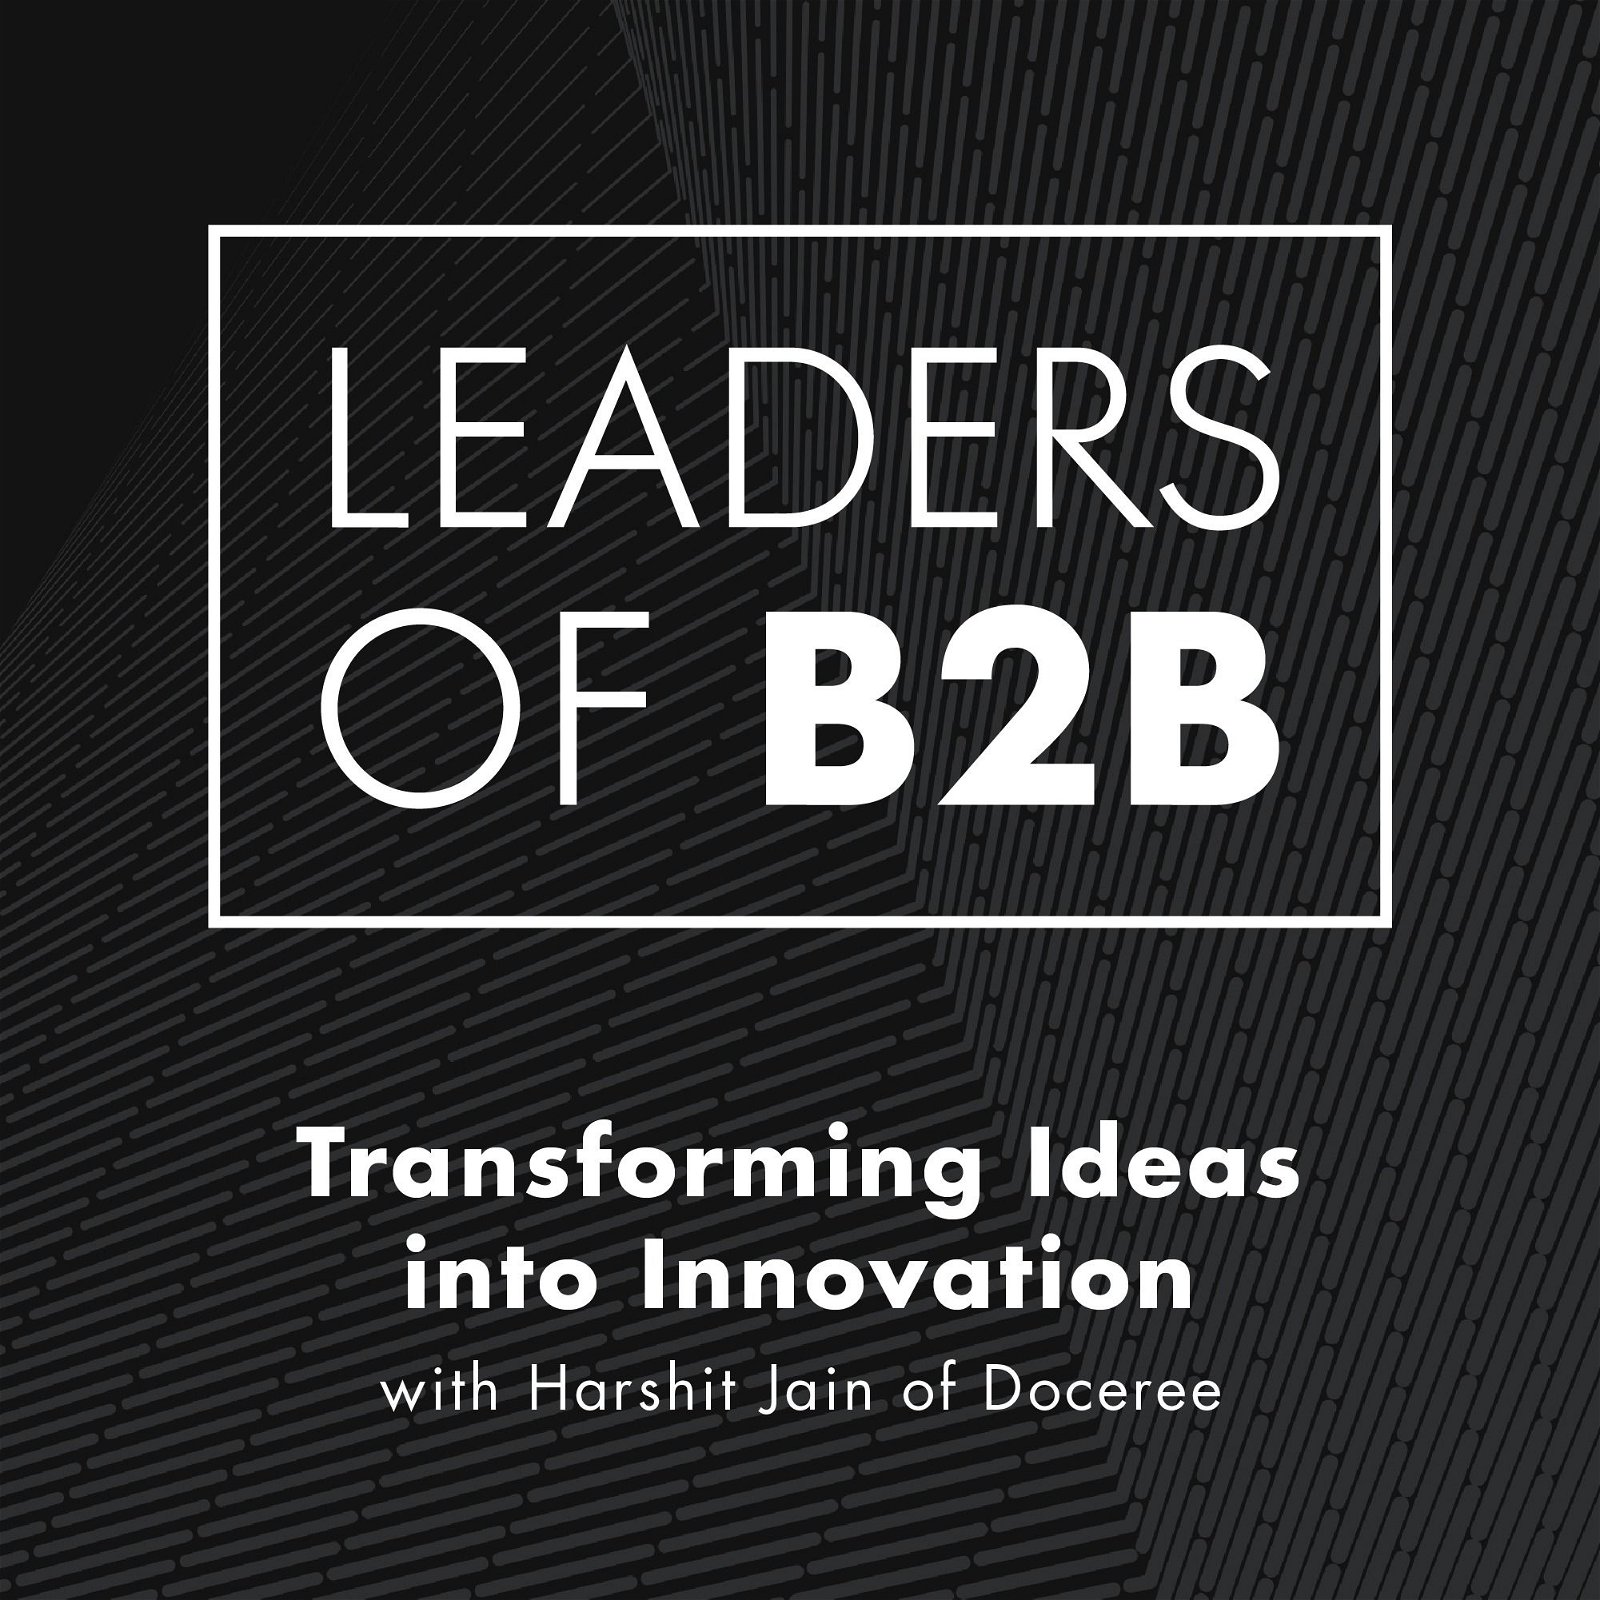 Transforming Ideas into Innovation with Harshit Jain of Doceree